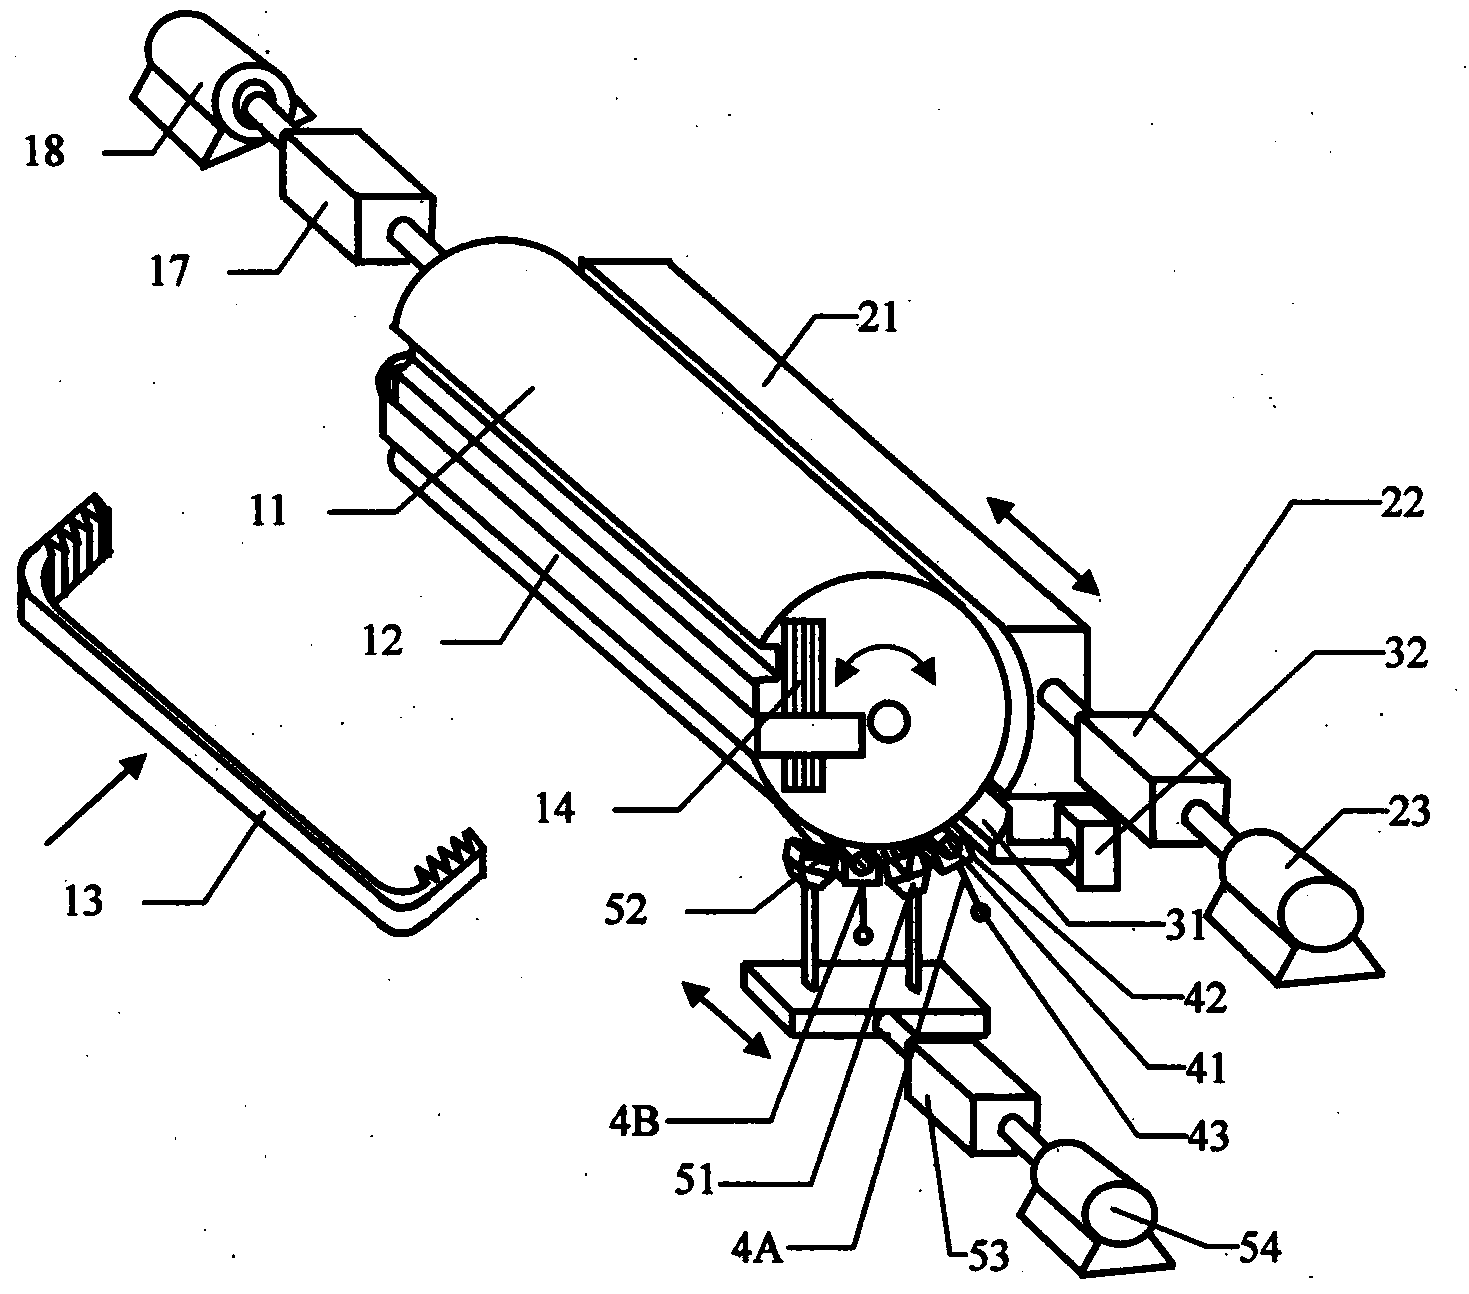 Method and device suitable for measuring fluffing and pilling amount and abrasion amount of textile